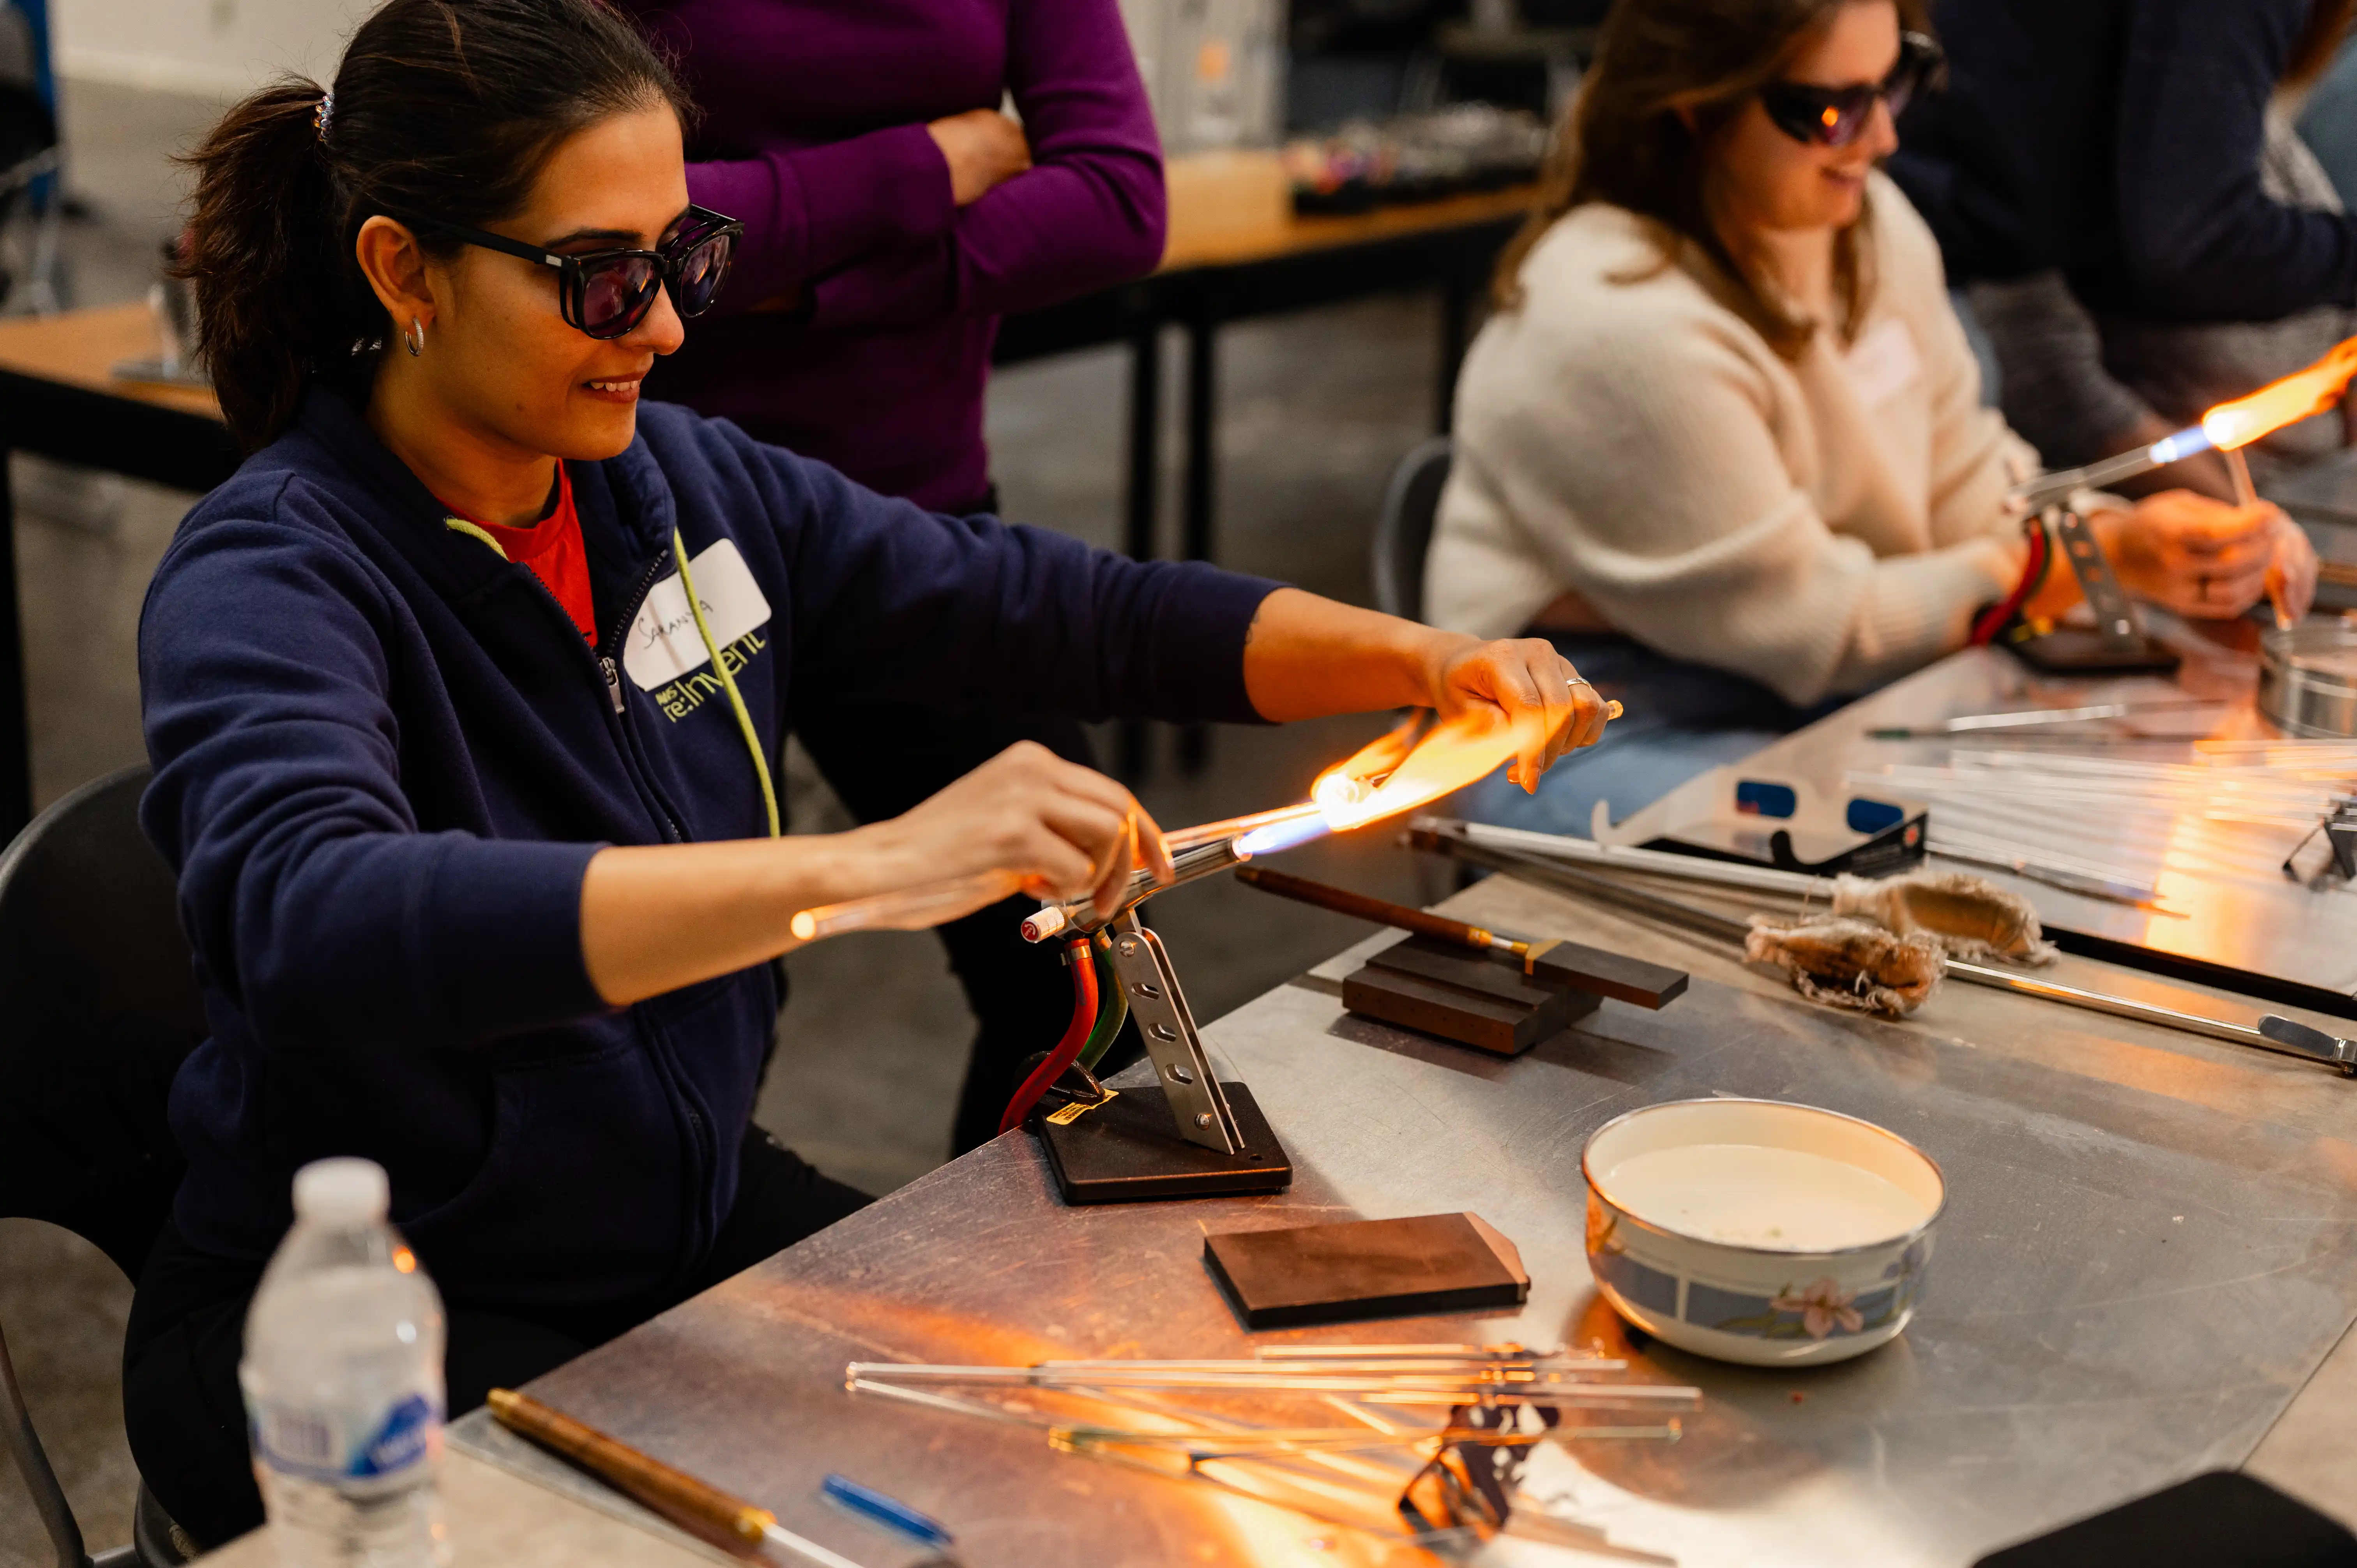 Woman wearing safety glasses shaping glass with a torch in a glassblowing workshop while other participants work in the background.